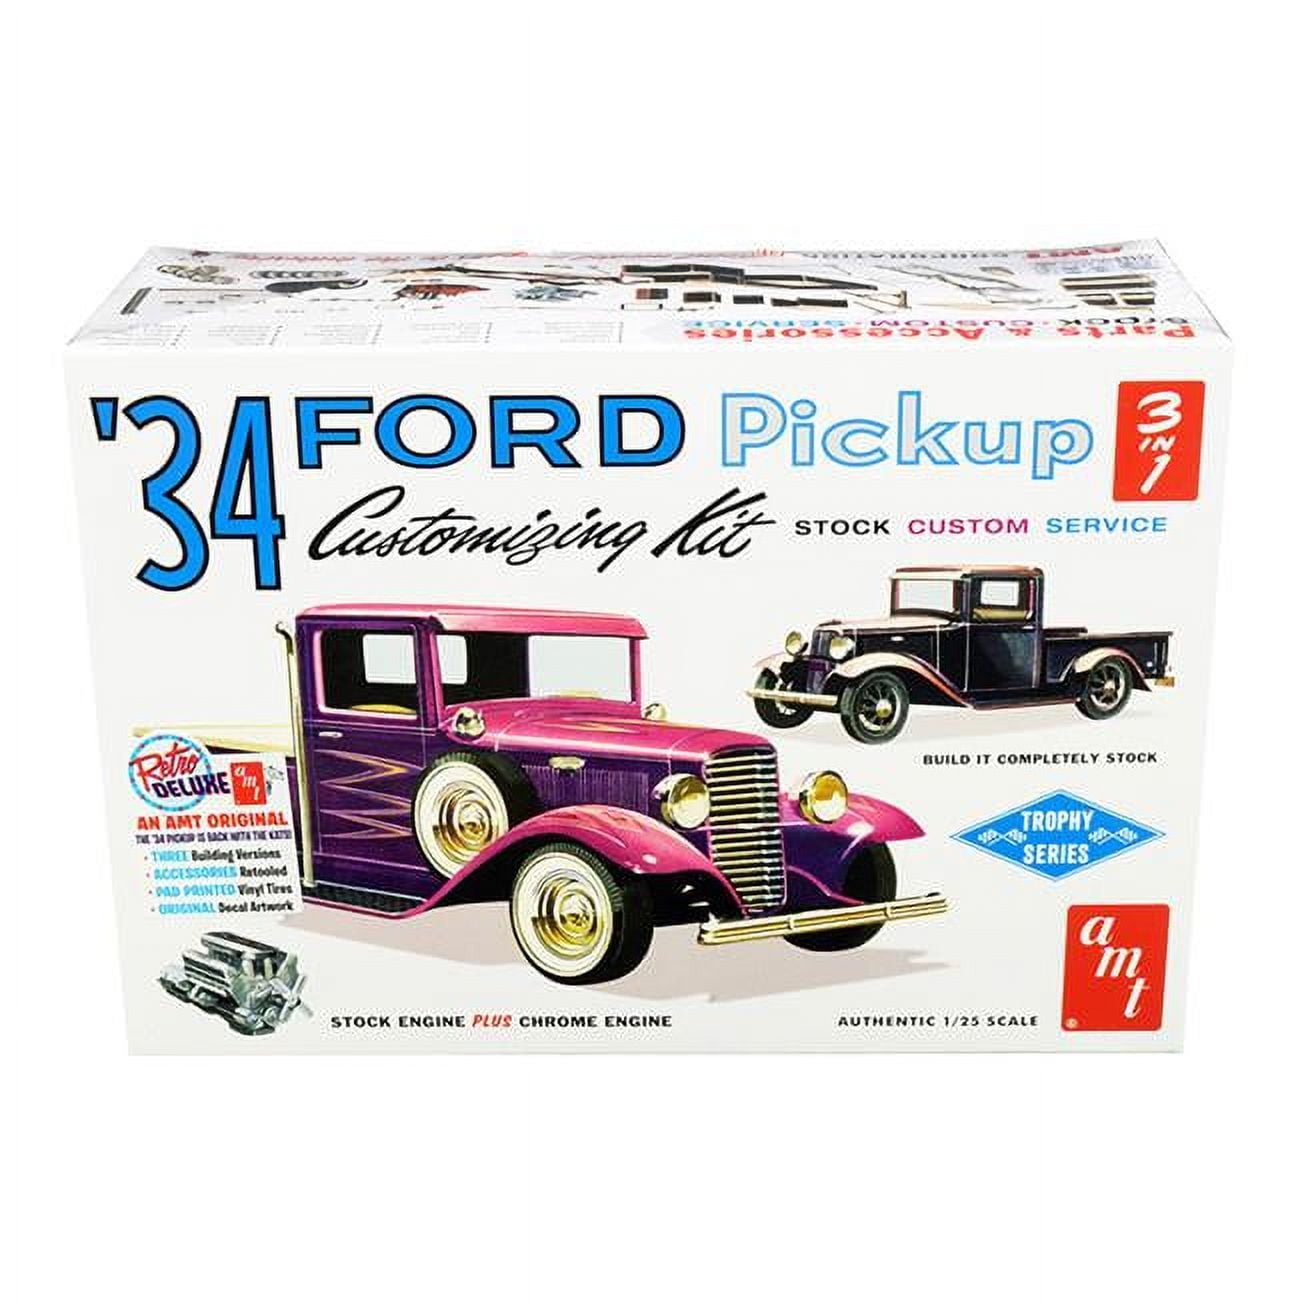 Picture of AMT AMT1120 Skill 2 Model Kit 1934 Ford Pickup Truck 3 in 1 Kit Trophy Series 1 by 25 Scale Model